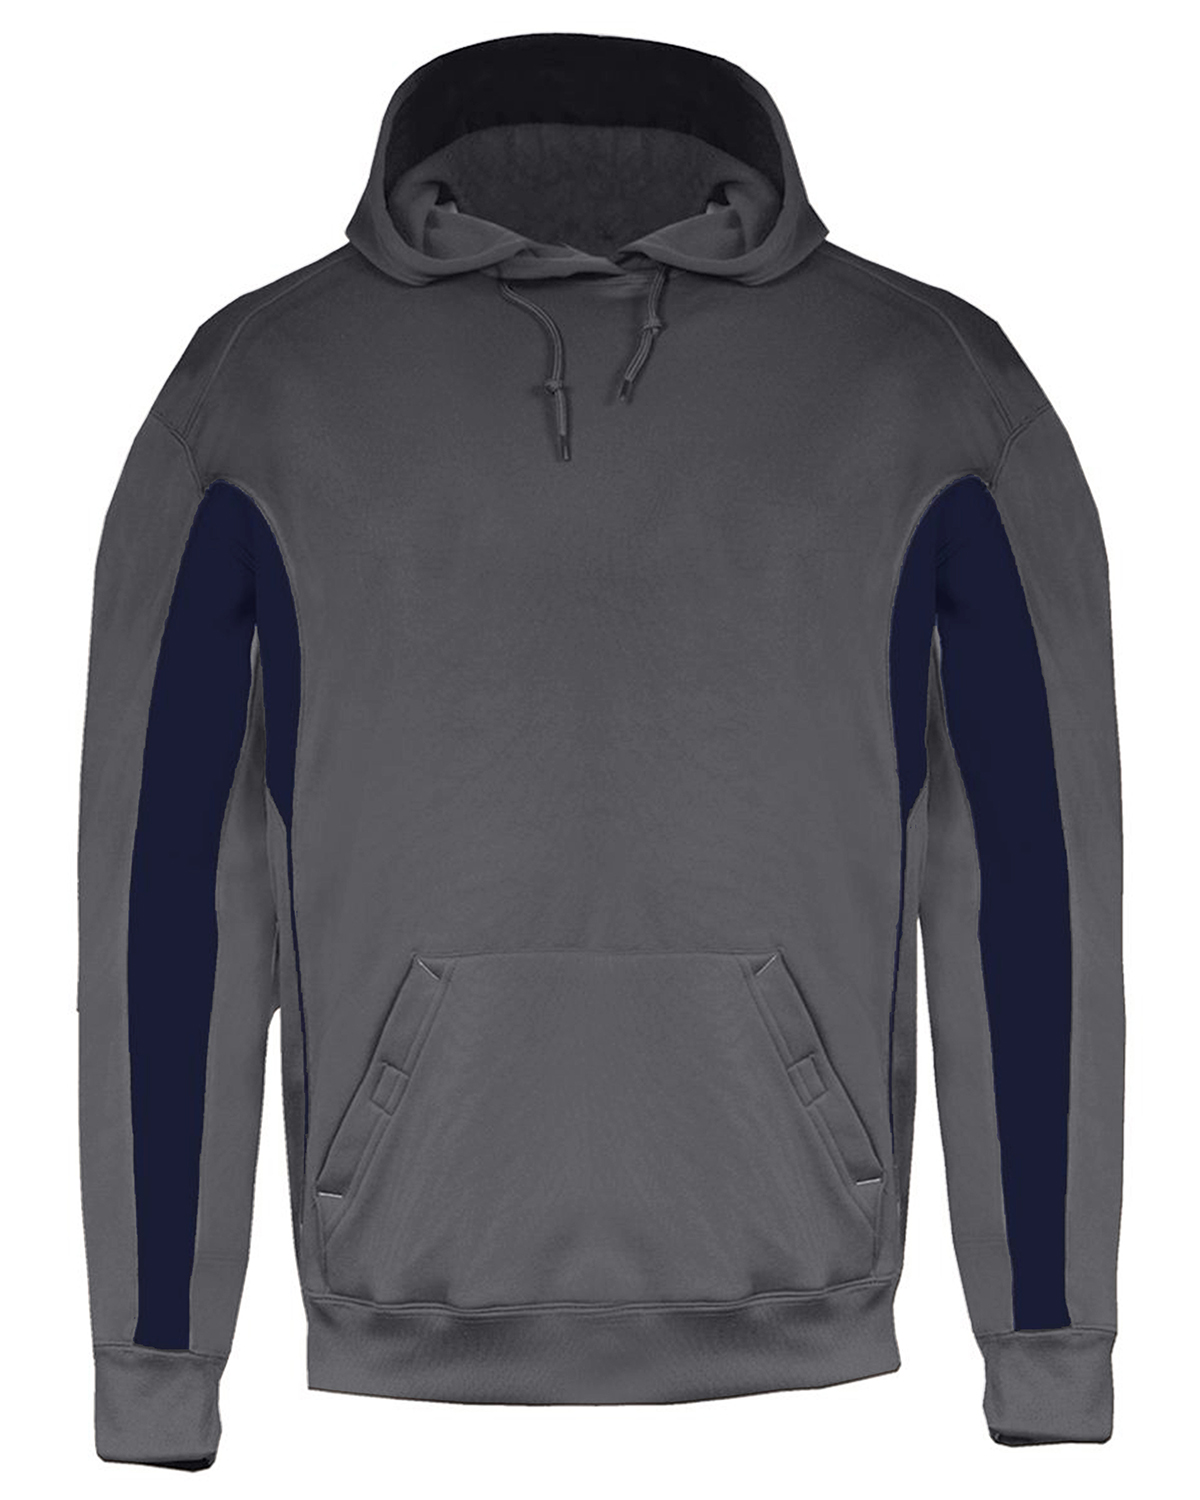 click to view GRAPHITE/ NAVY